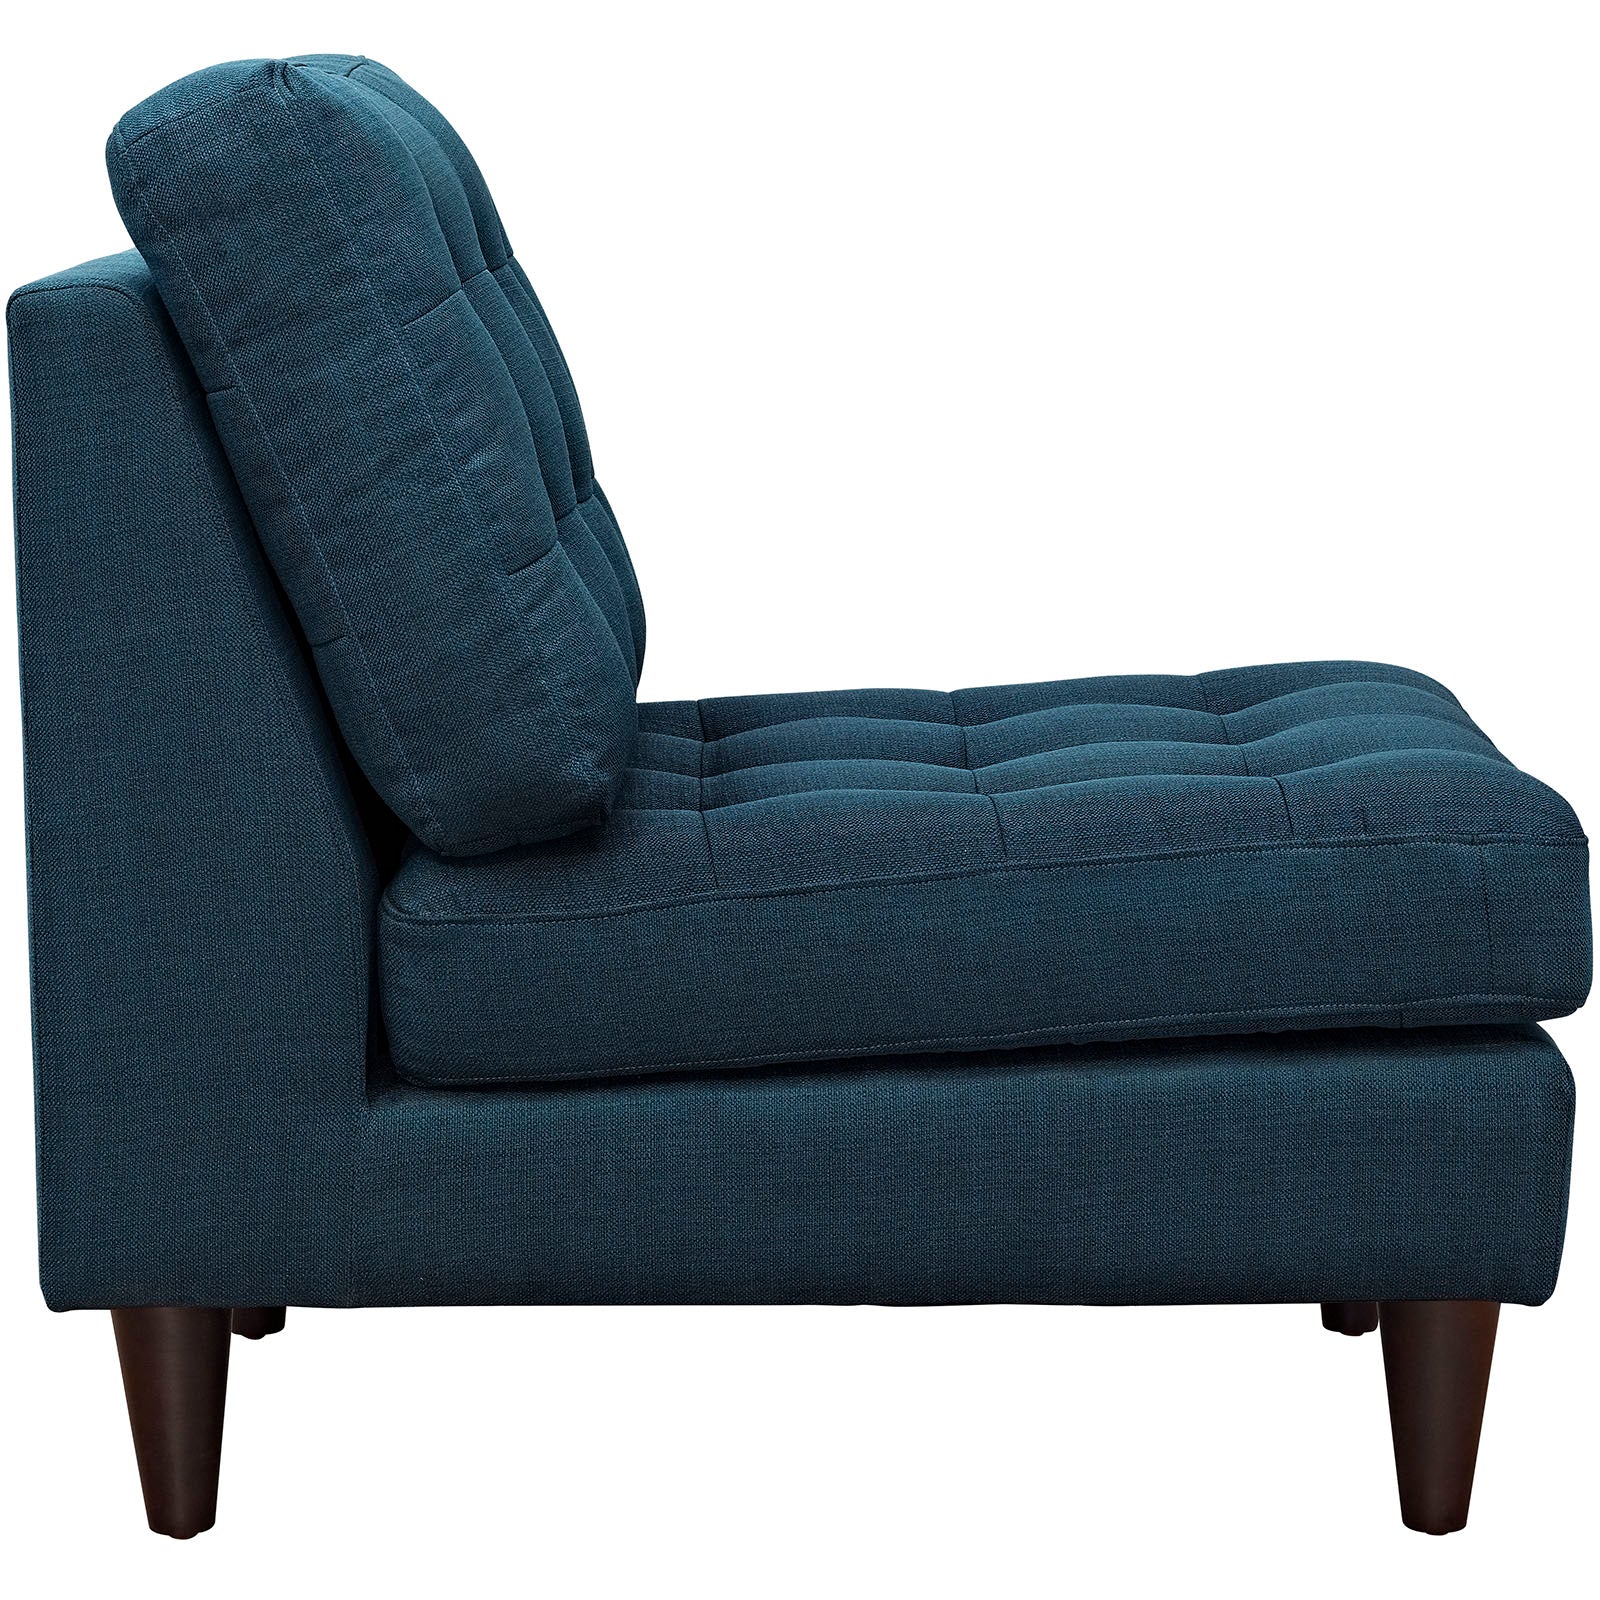 Modway Accent Chairs - Empress Upholstered Fabric Lounge Chair Azure